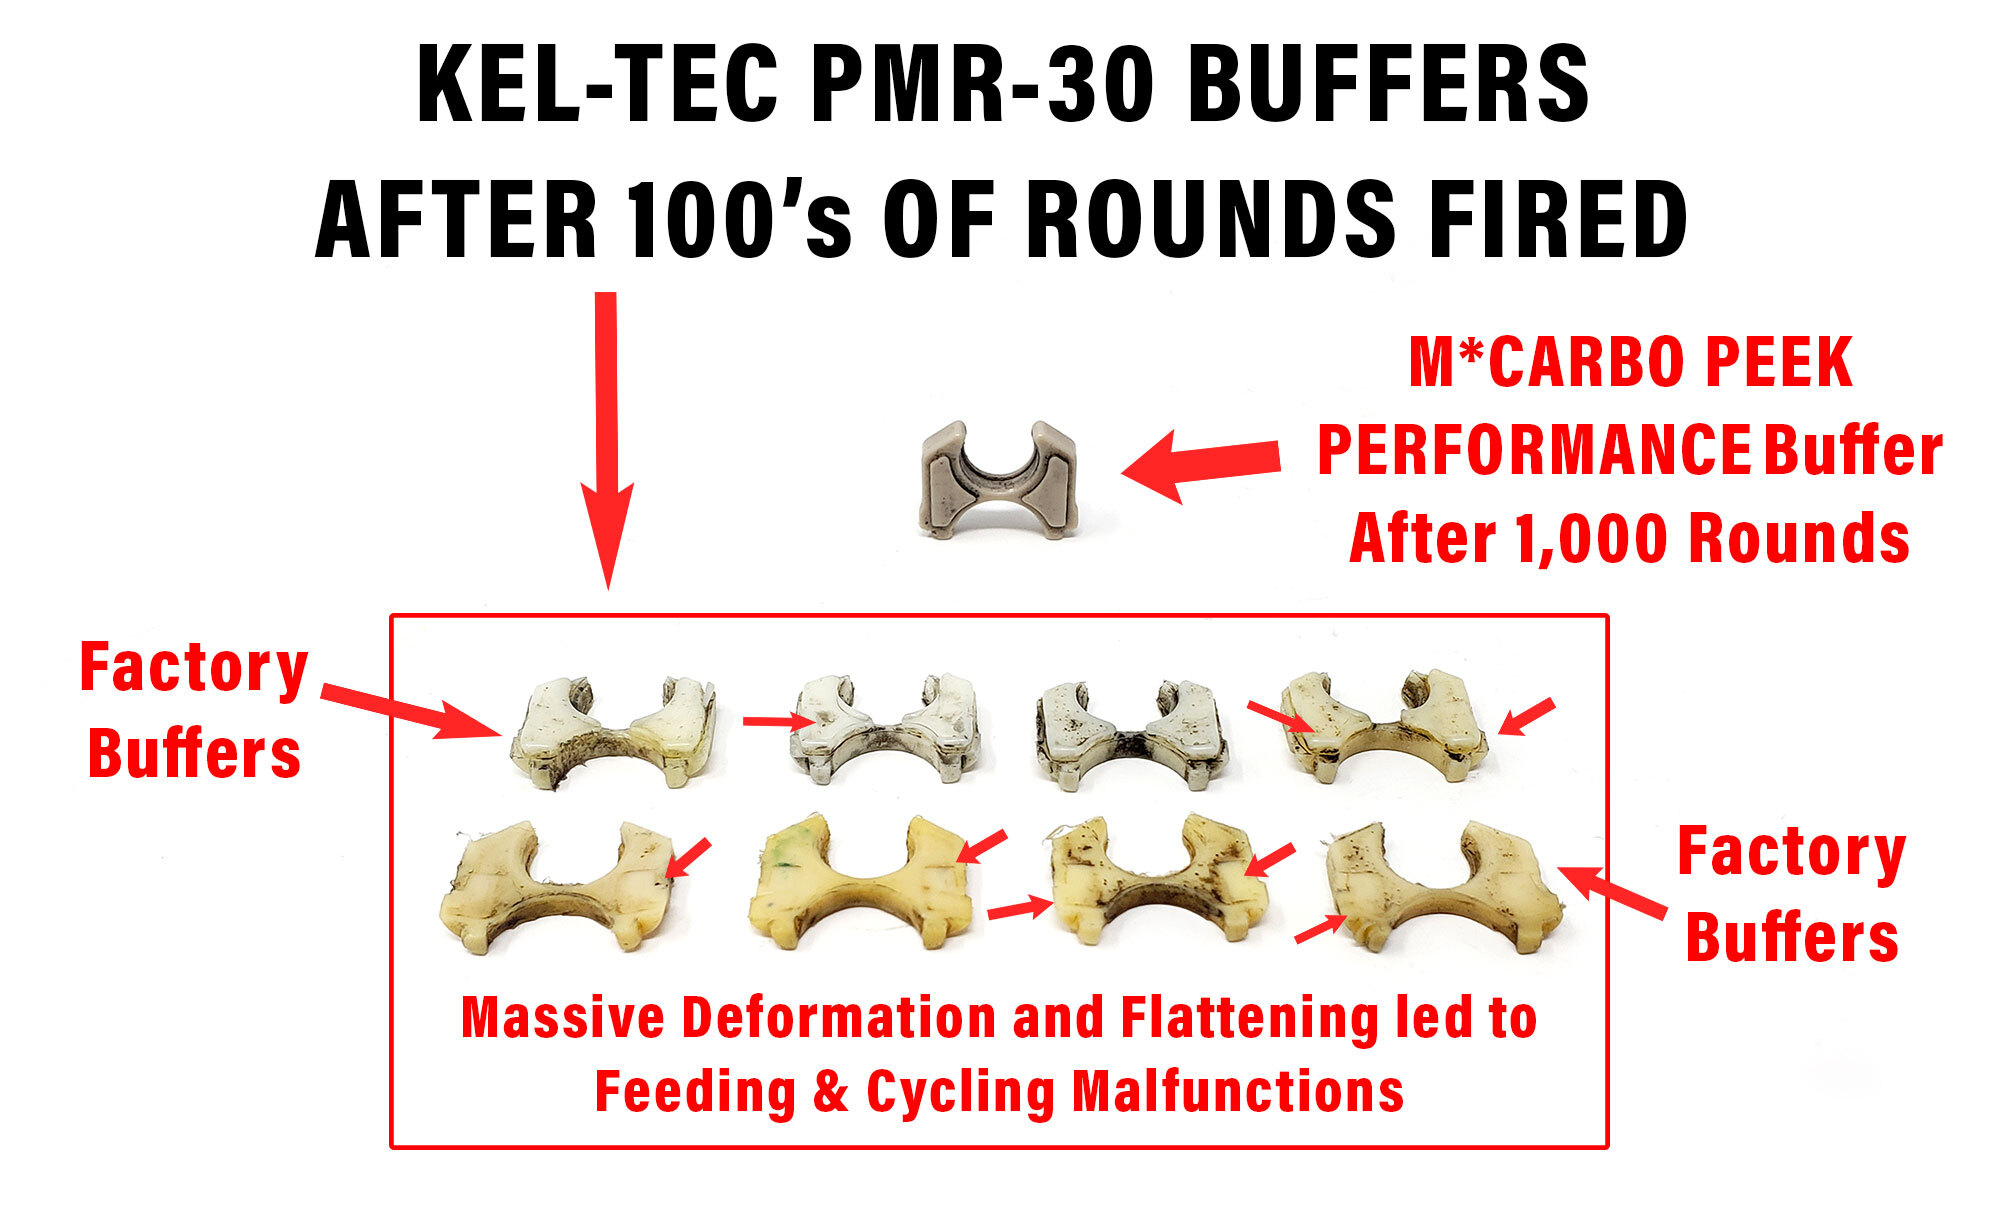 KEL TEC PMR 30 Buffer Comparison After 100 Rounds Fired